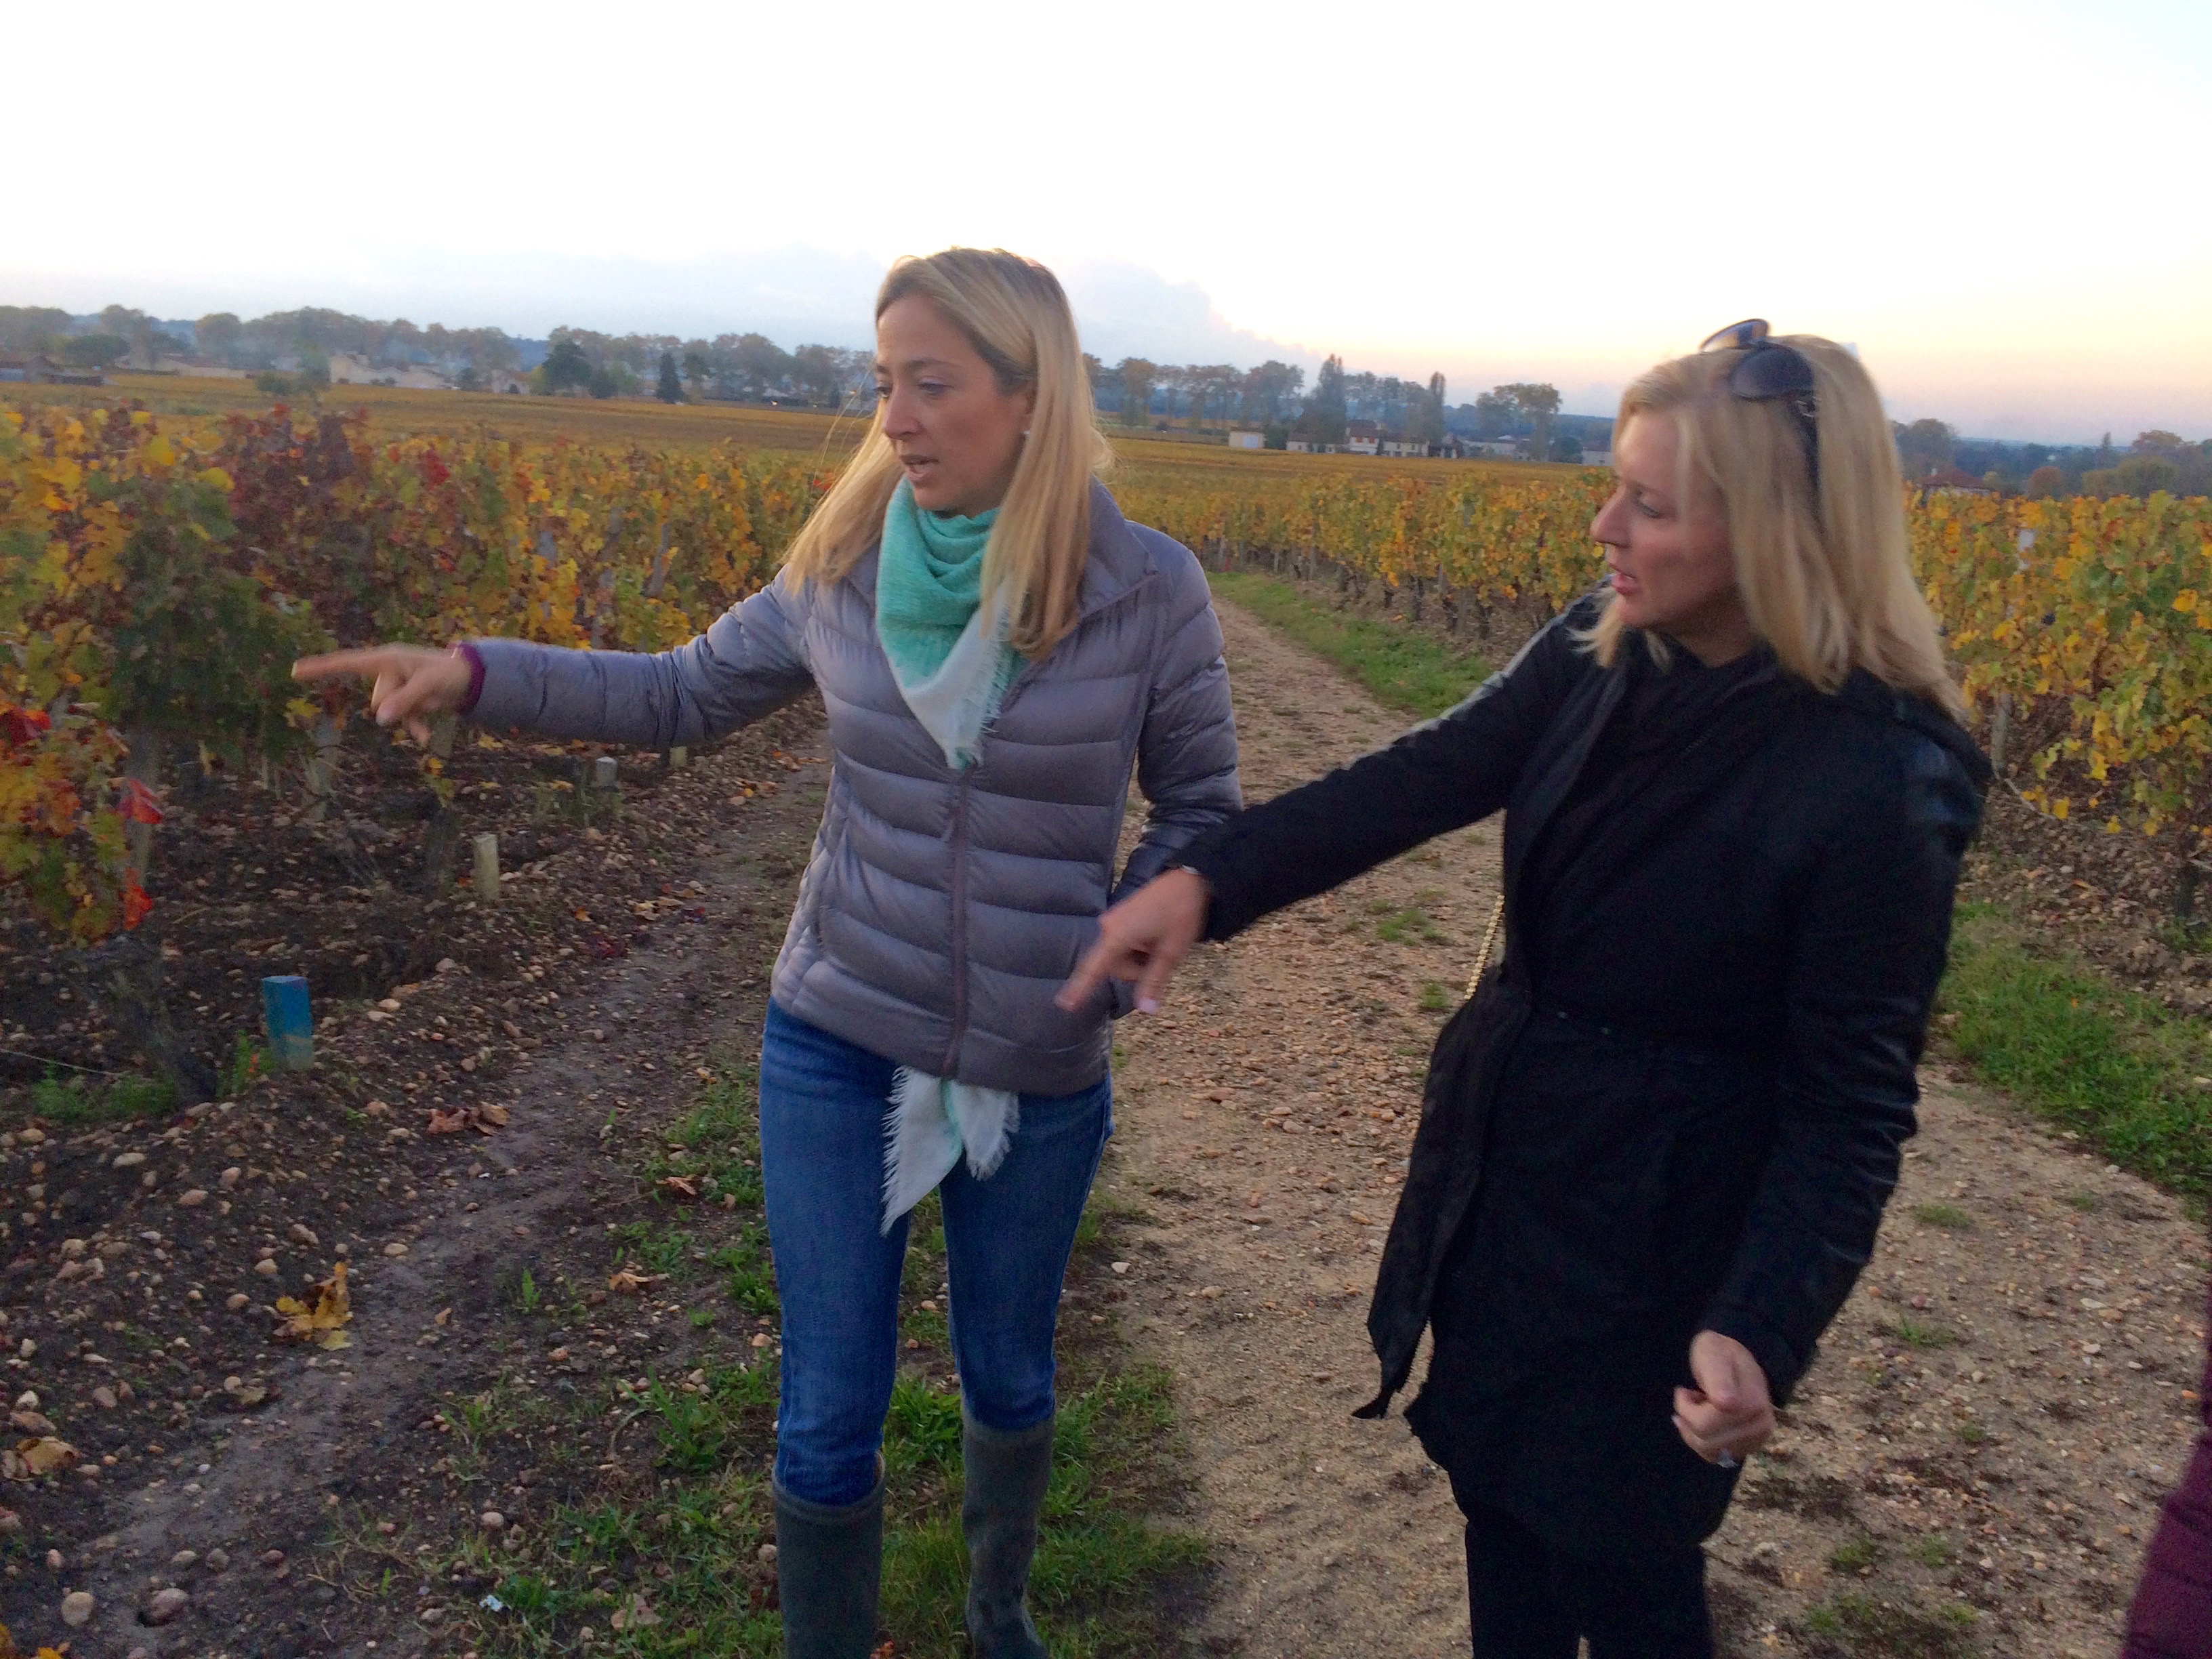 At Château Poesia, Hélène guides Deena Cossich through the vineyards, during a tour sponsored by Destin Charity Wine Auction Foundation.